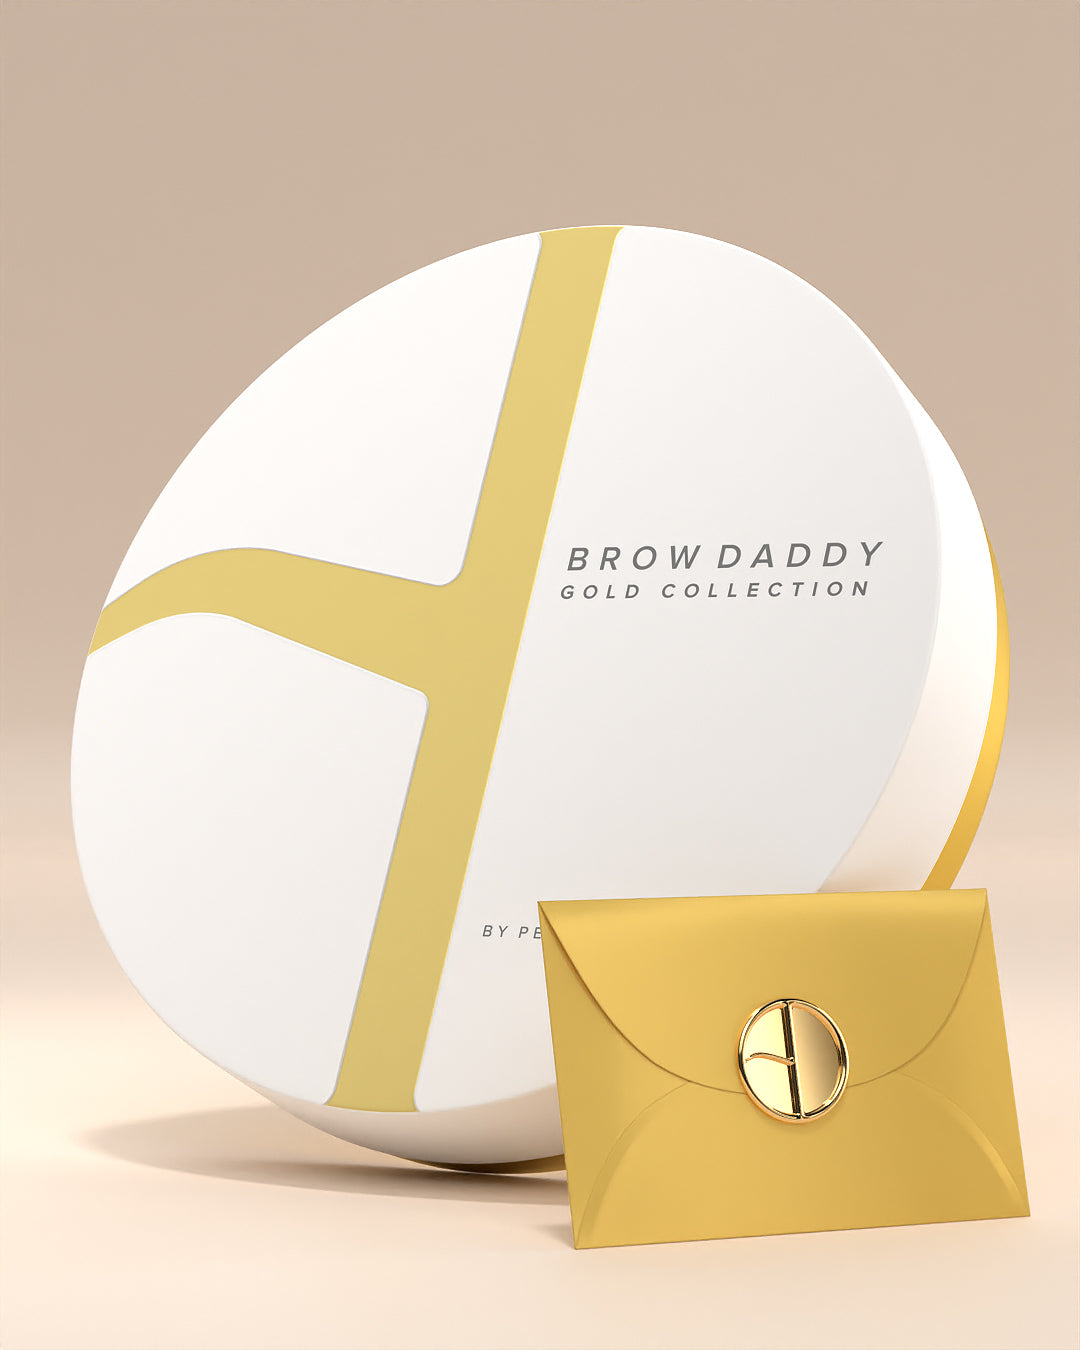 Brow daddy gold collection